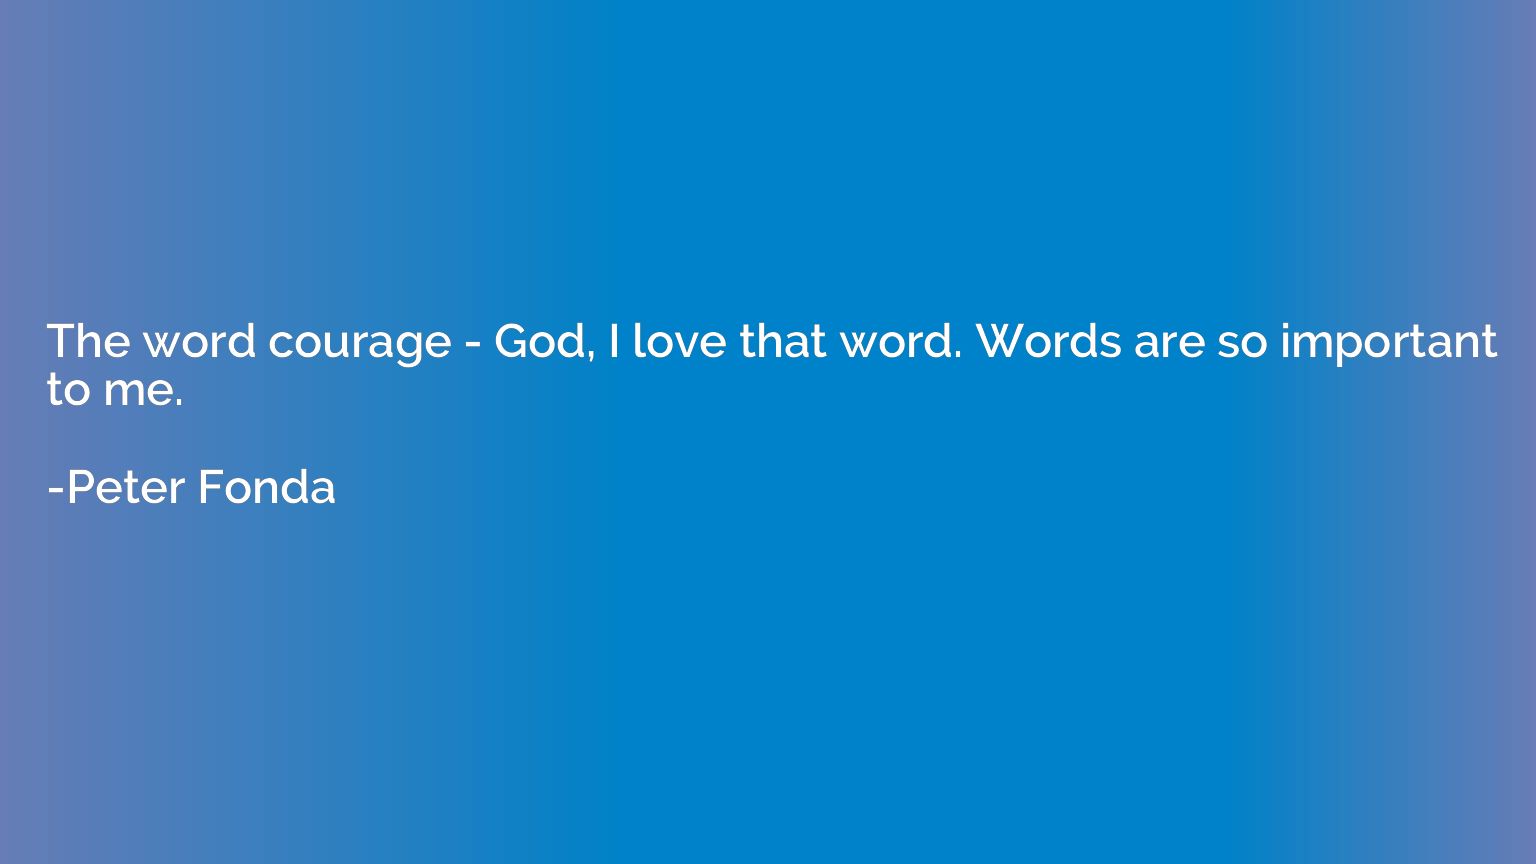 The word courage - God, I love that word. Words are so impor